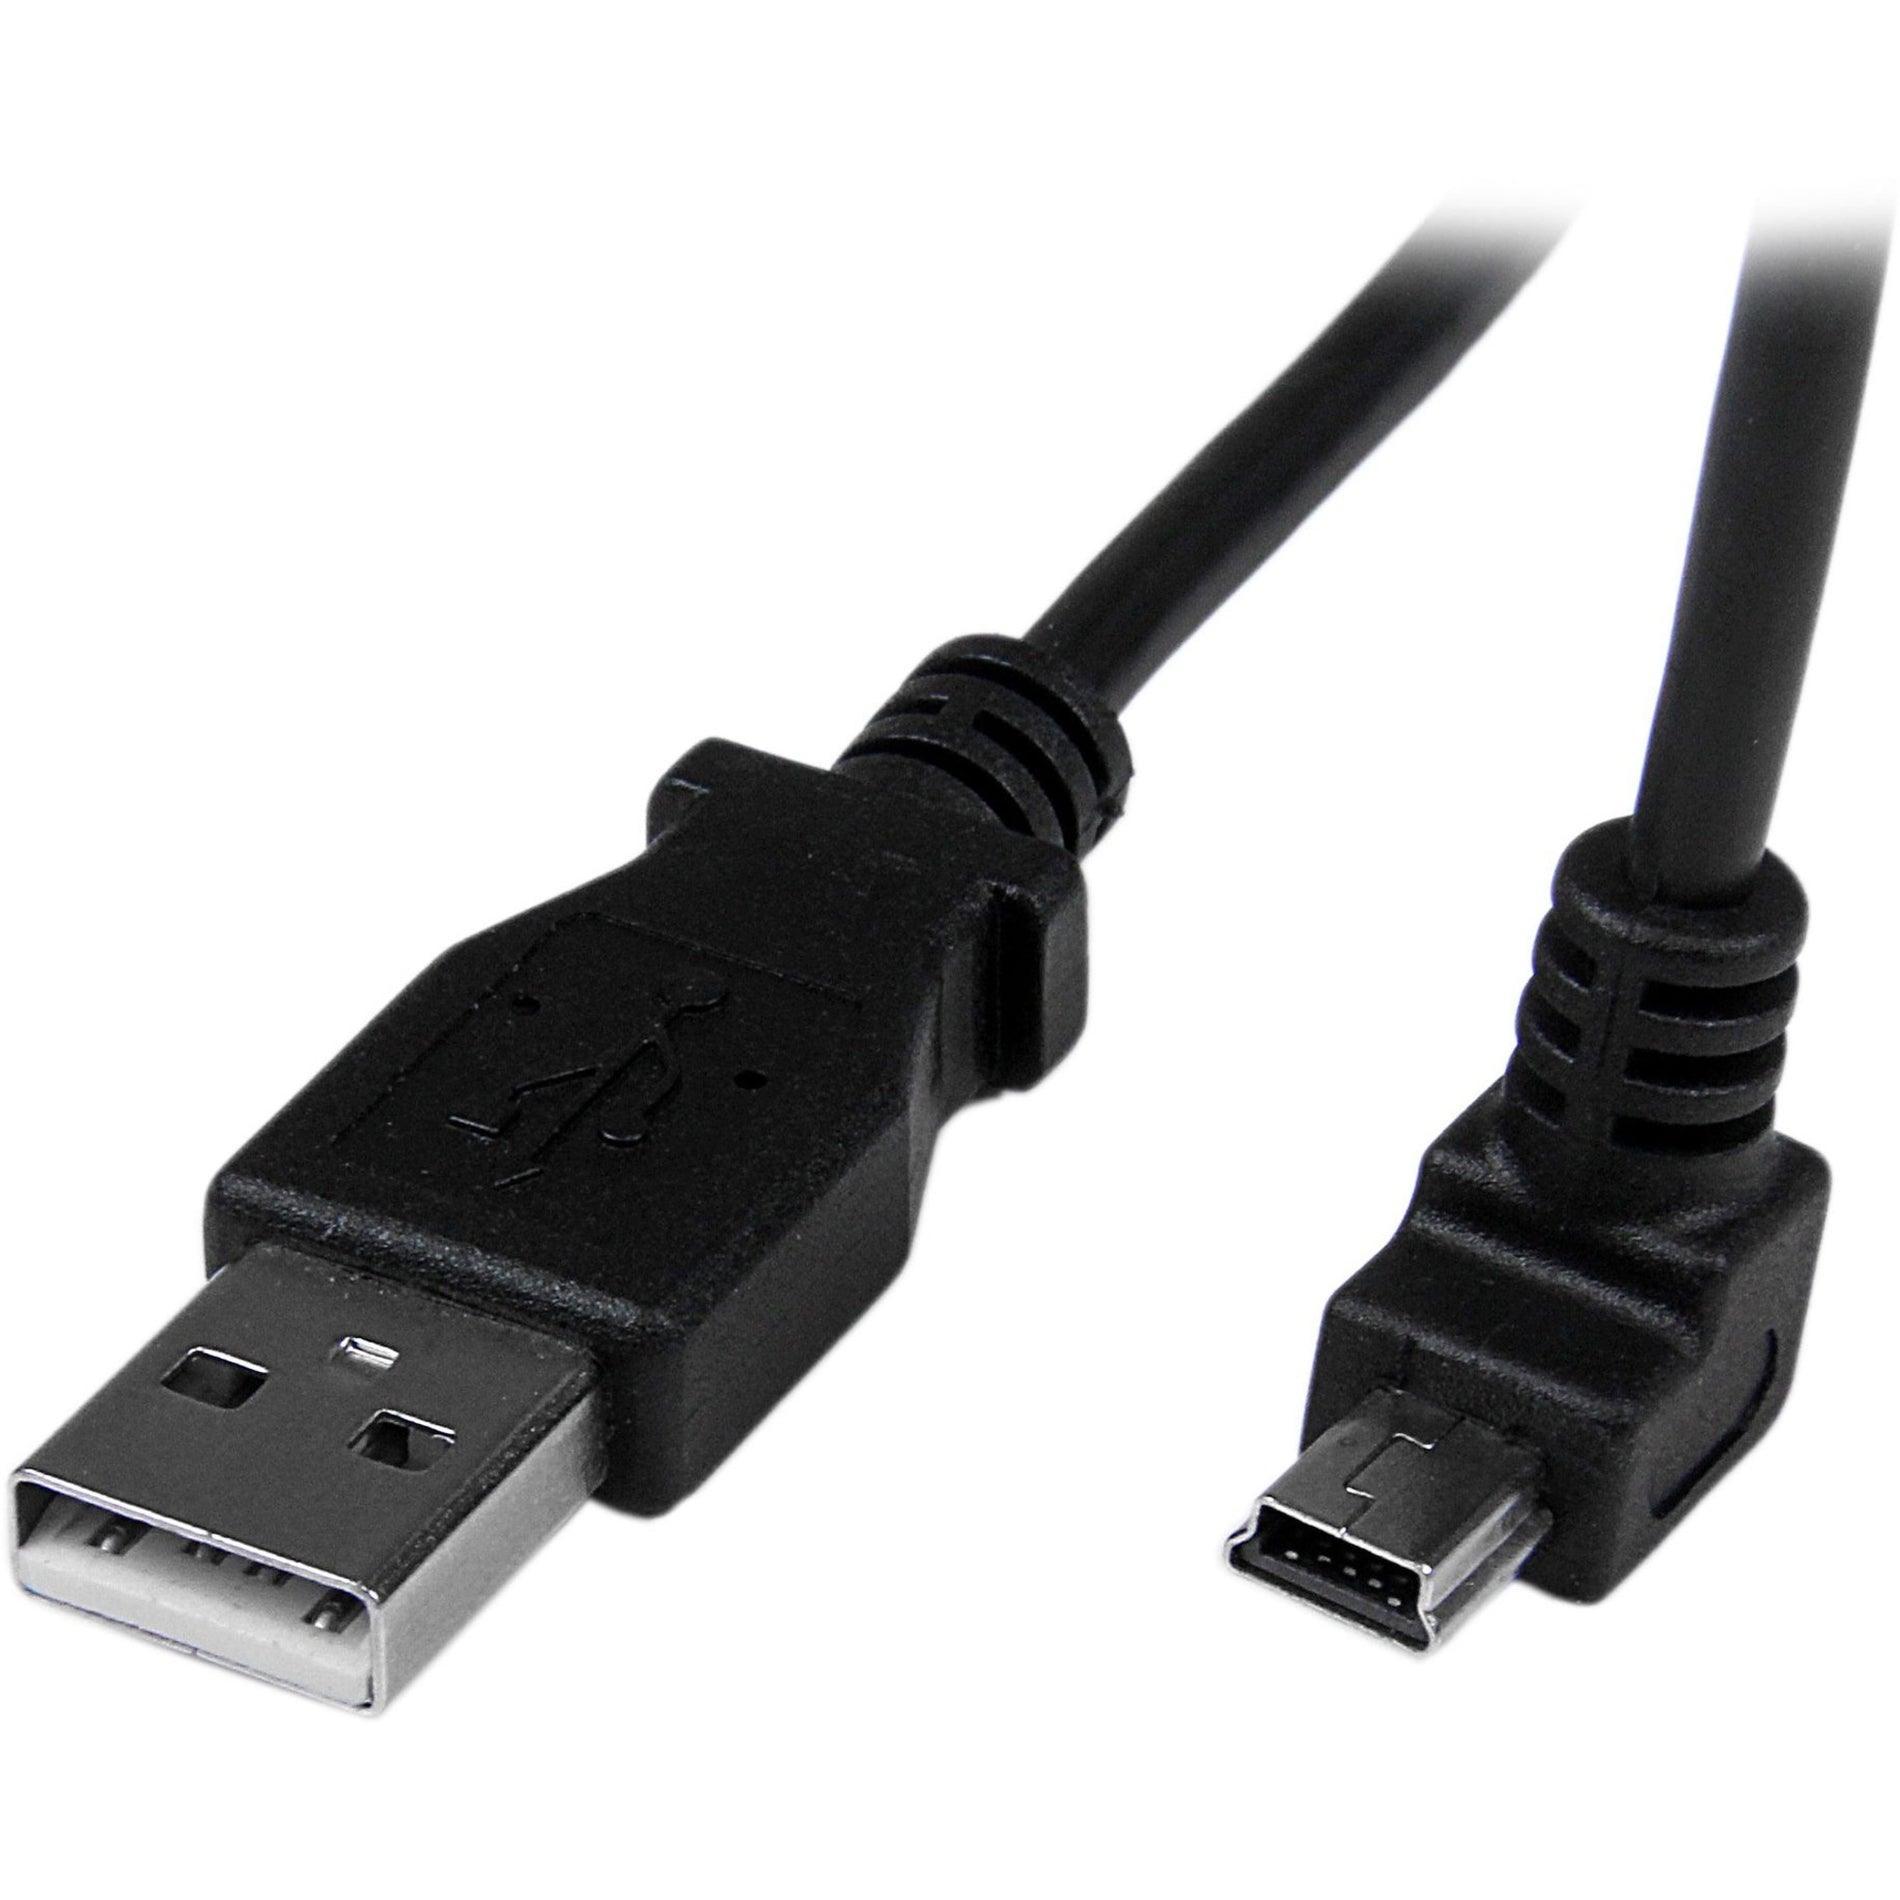 StarTech.com USBAMB2MD 2m Mini USB Cable - A to Down Angle Mini B, Strain Relief, Molded, 480 Mbit/s Data Transfer Rate